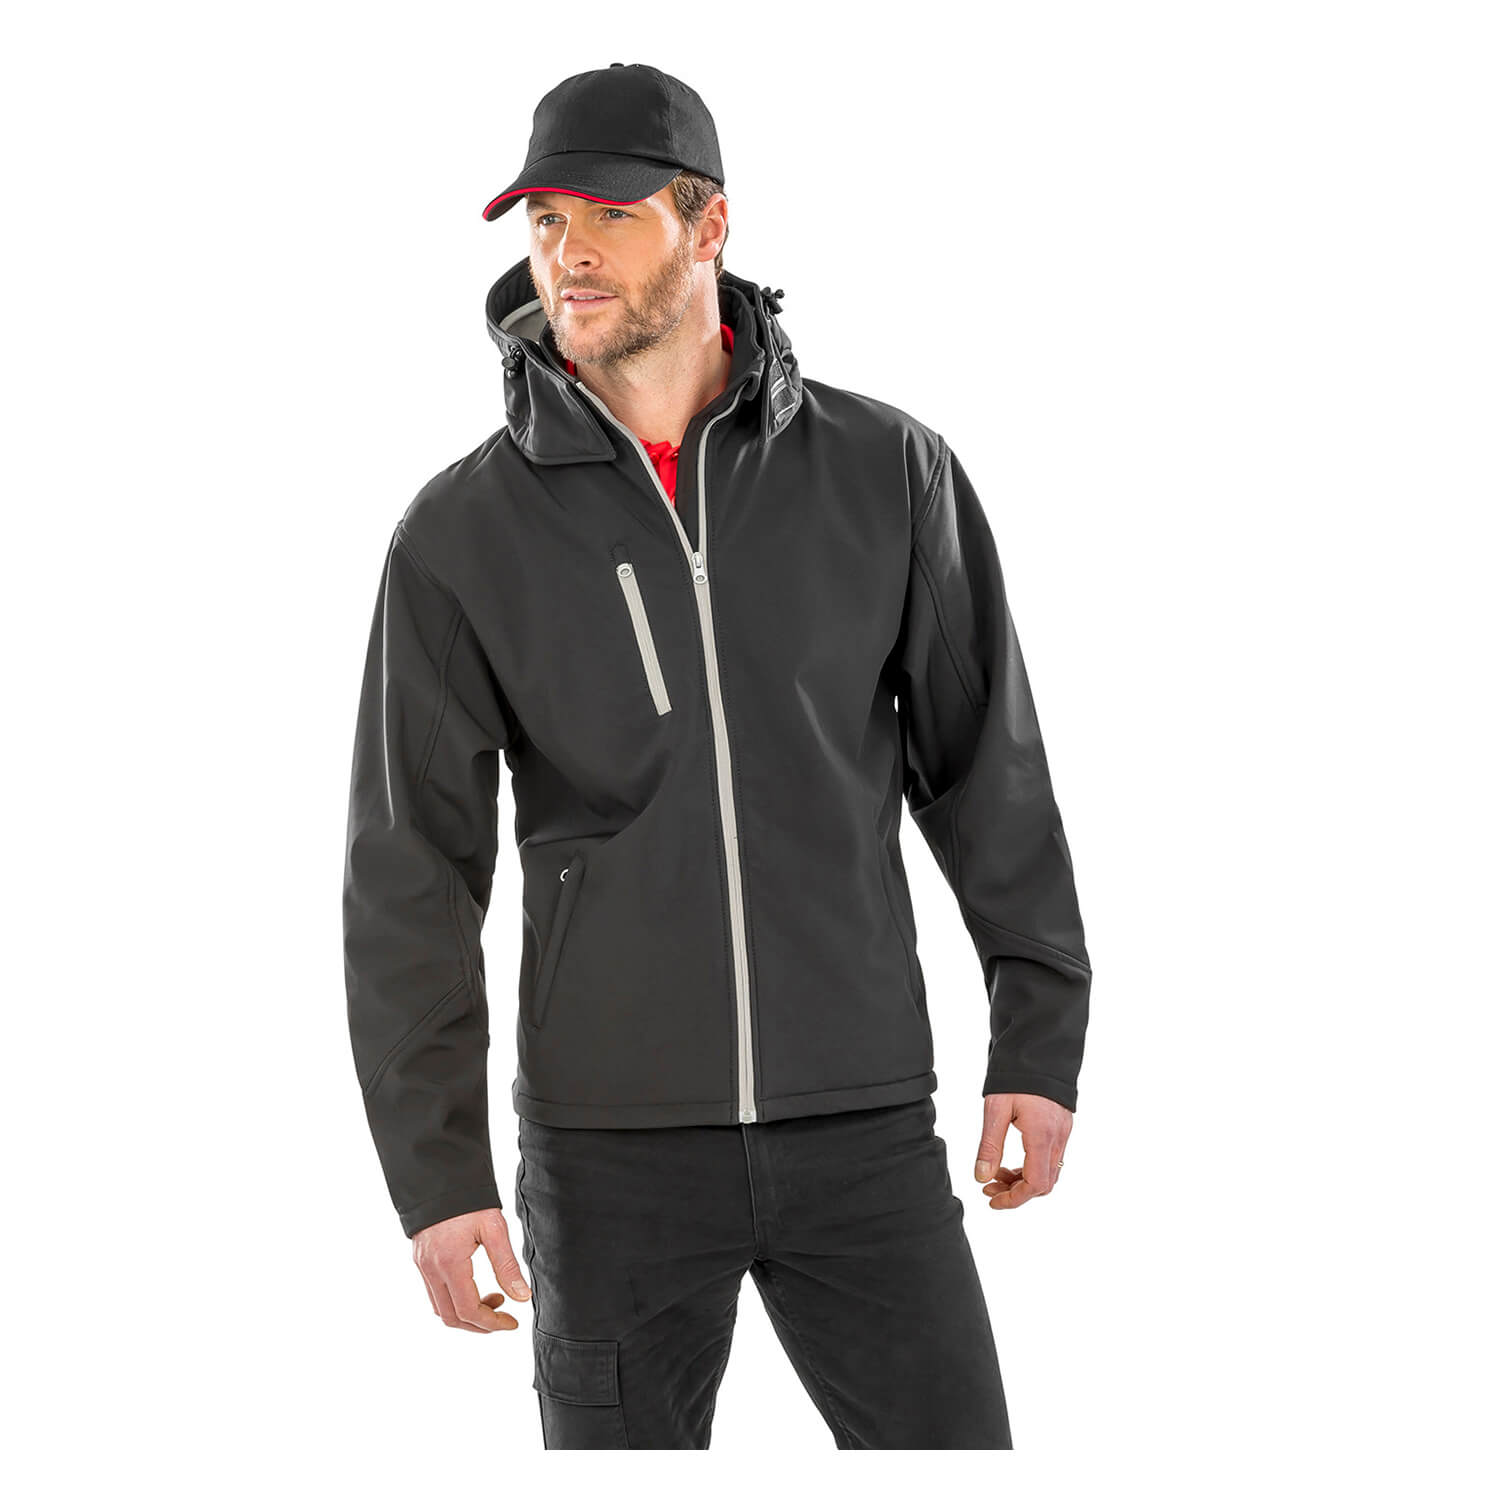 Core TX Performance Hooded Softshell Jacket - Recognition Express Suffolk